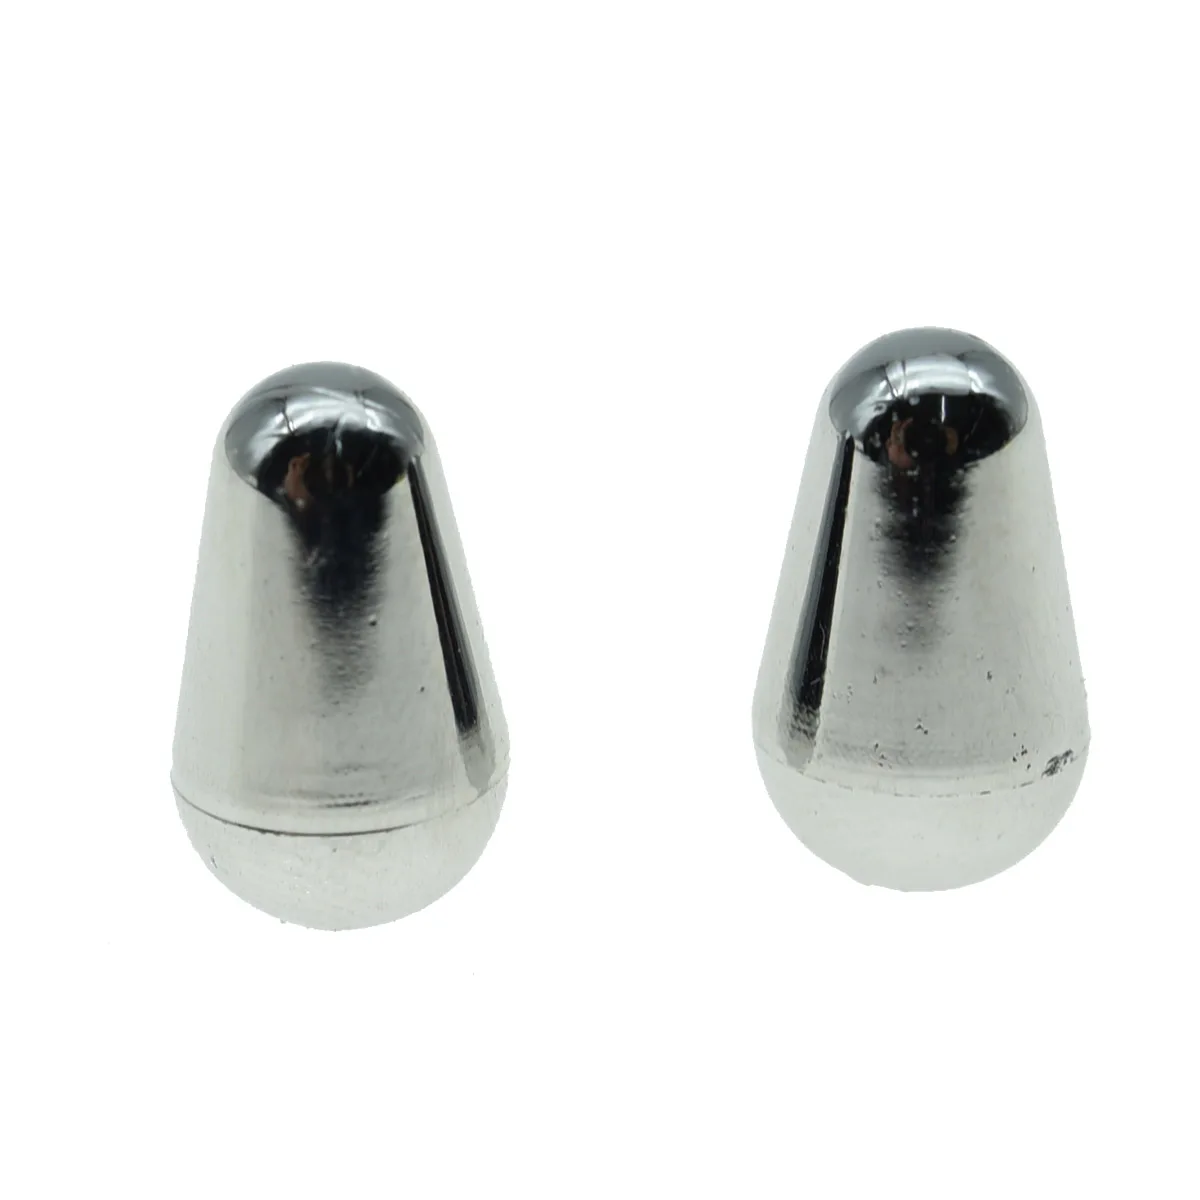 

KAISH 2 Pcs Chrome ST Guitar 5 Way Switch Tip Switch Knob Cap fits For Fender USA for Strat